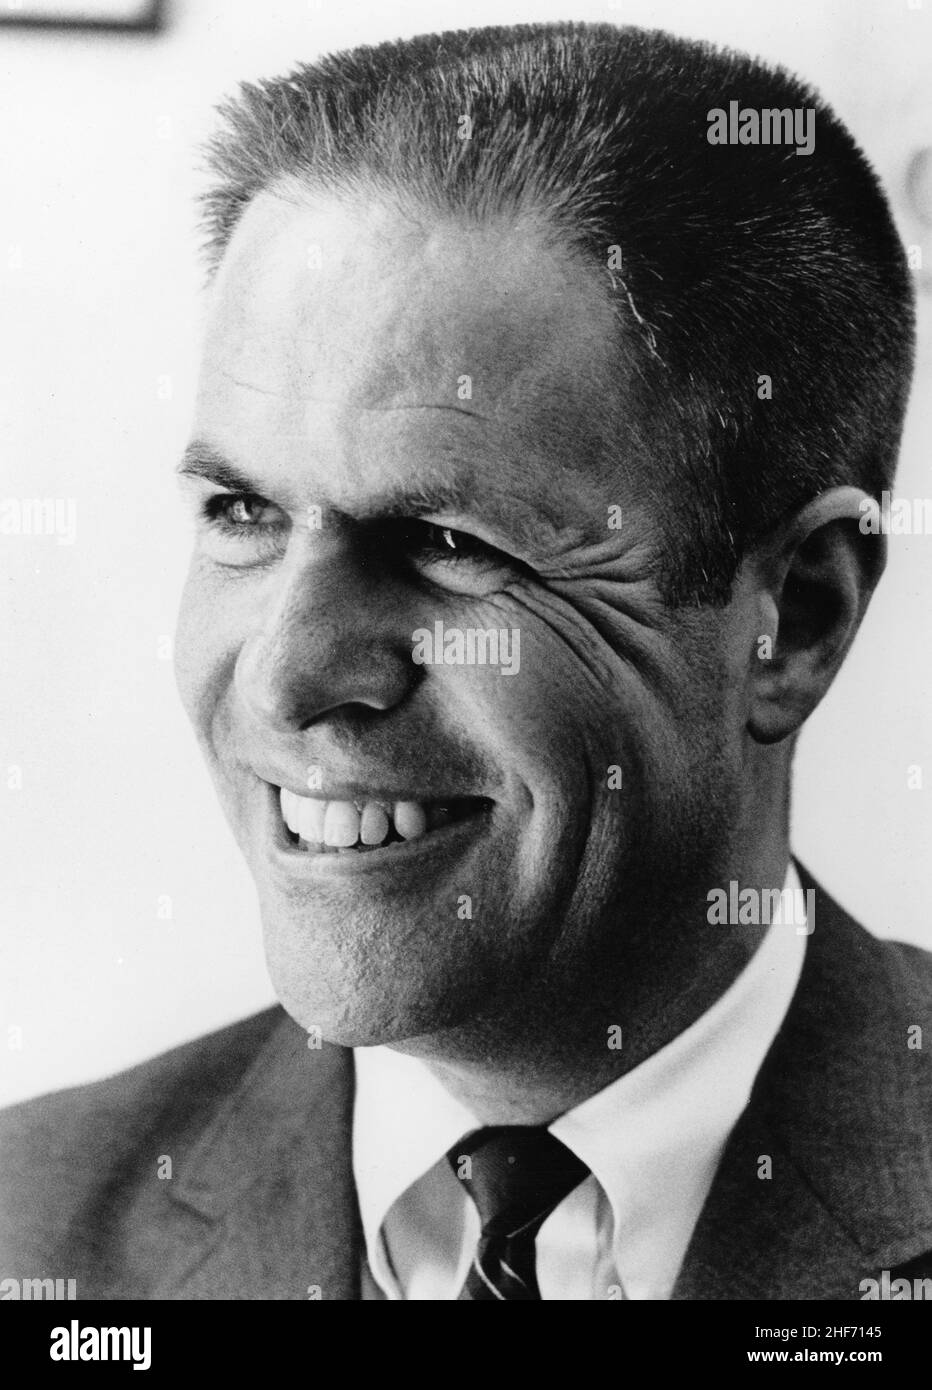 Harry Robbins 'Bob' Haldeman (1926-1993) was a Republican associated with Richard M Nixon during his political career. Haldeman was named Nixon's chief of staff in 1968 playing a prominent role in Watergate, Washington, DC, circa 1970. Stock Photo